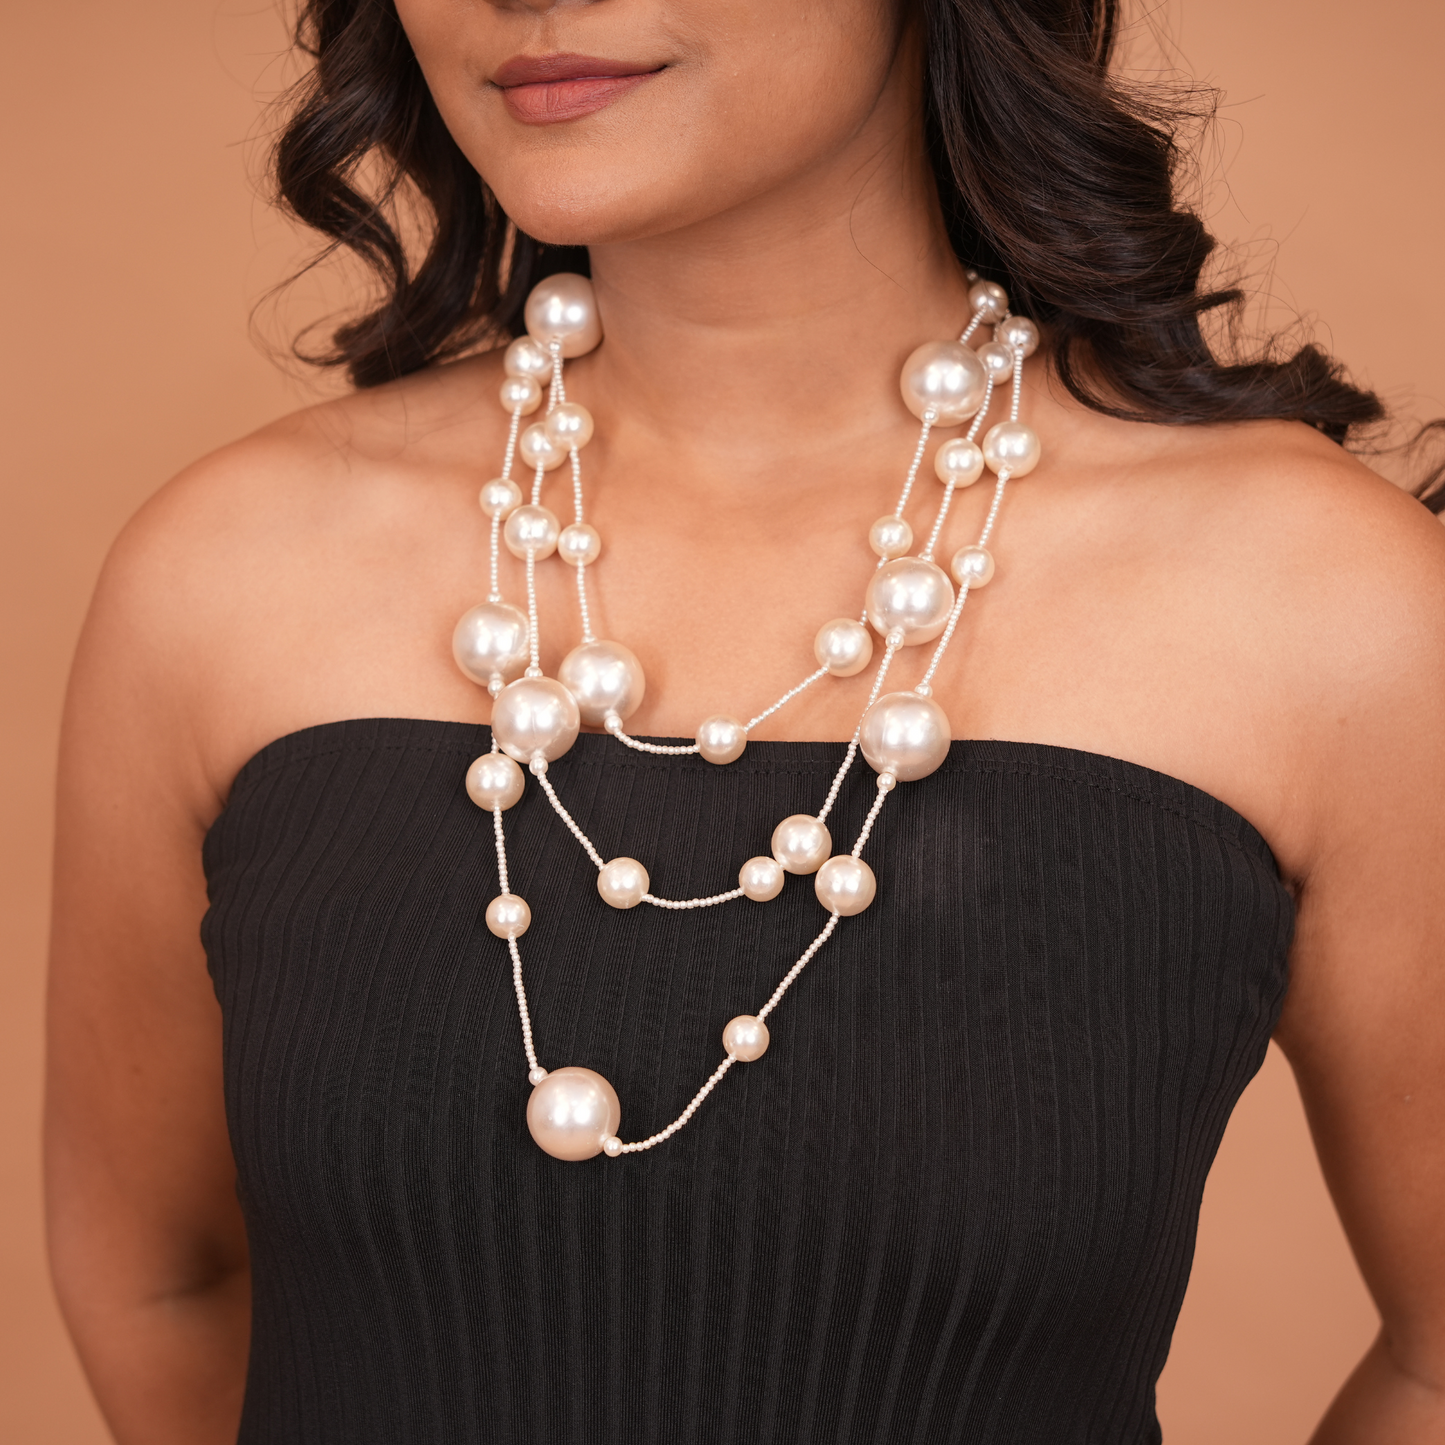 Adjustable Multi-Layer White Pearl Long Strand Station Necklace with Varied Pearl Sizes